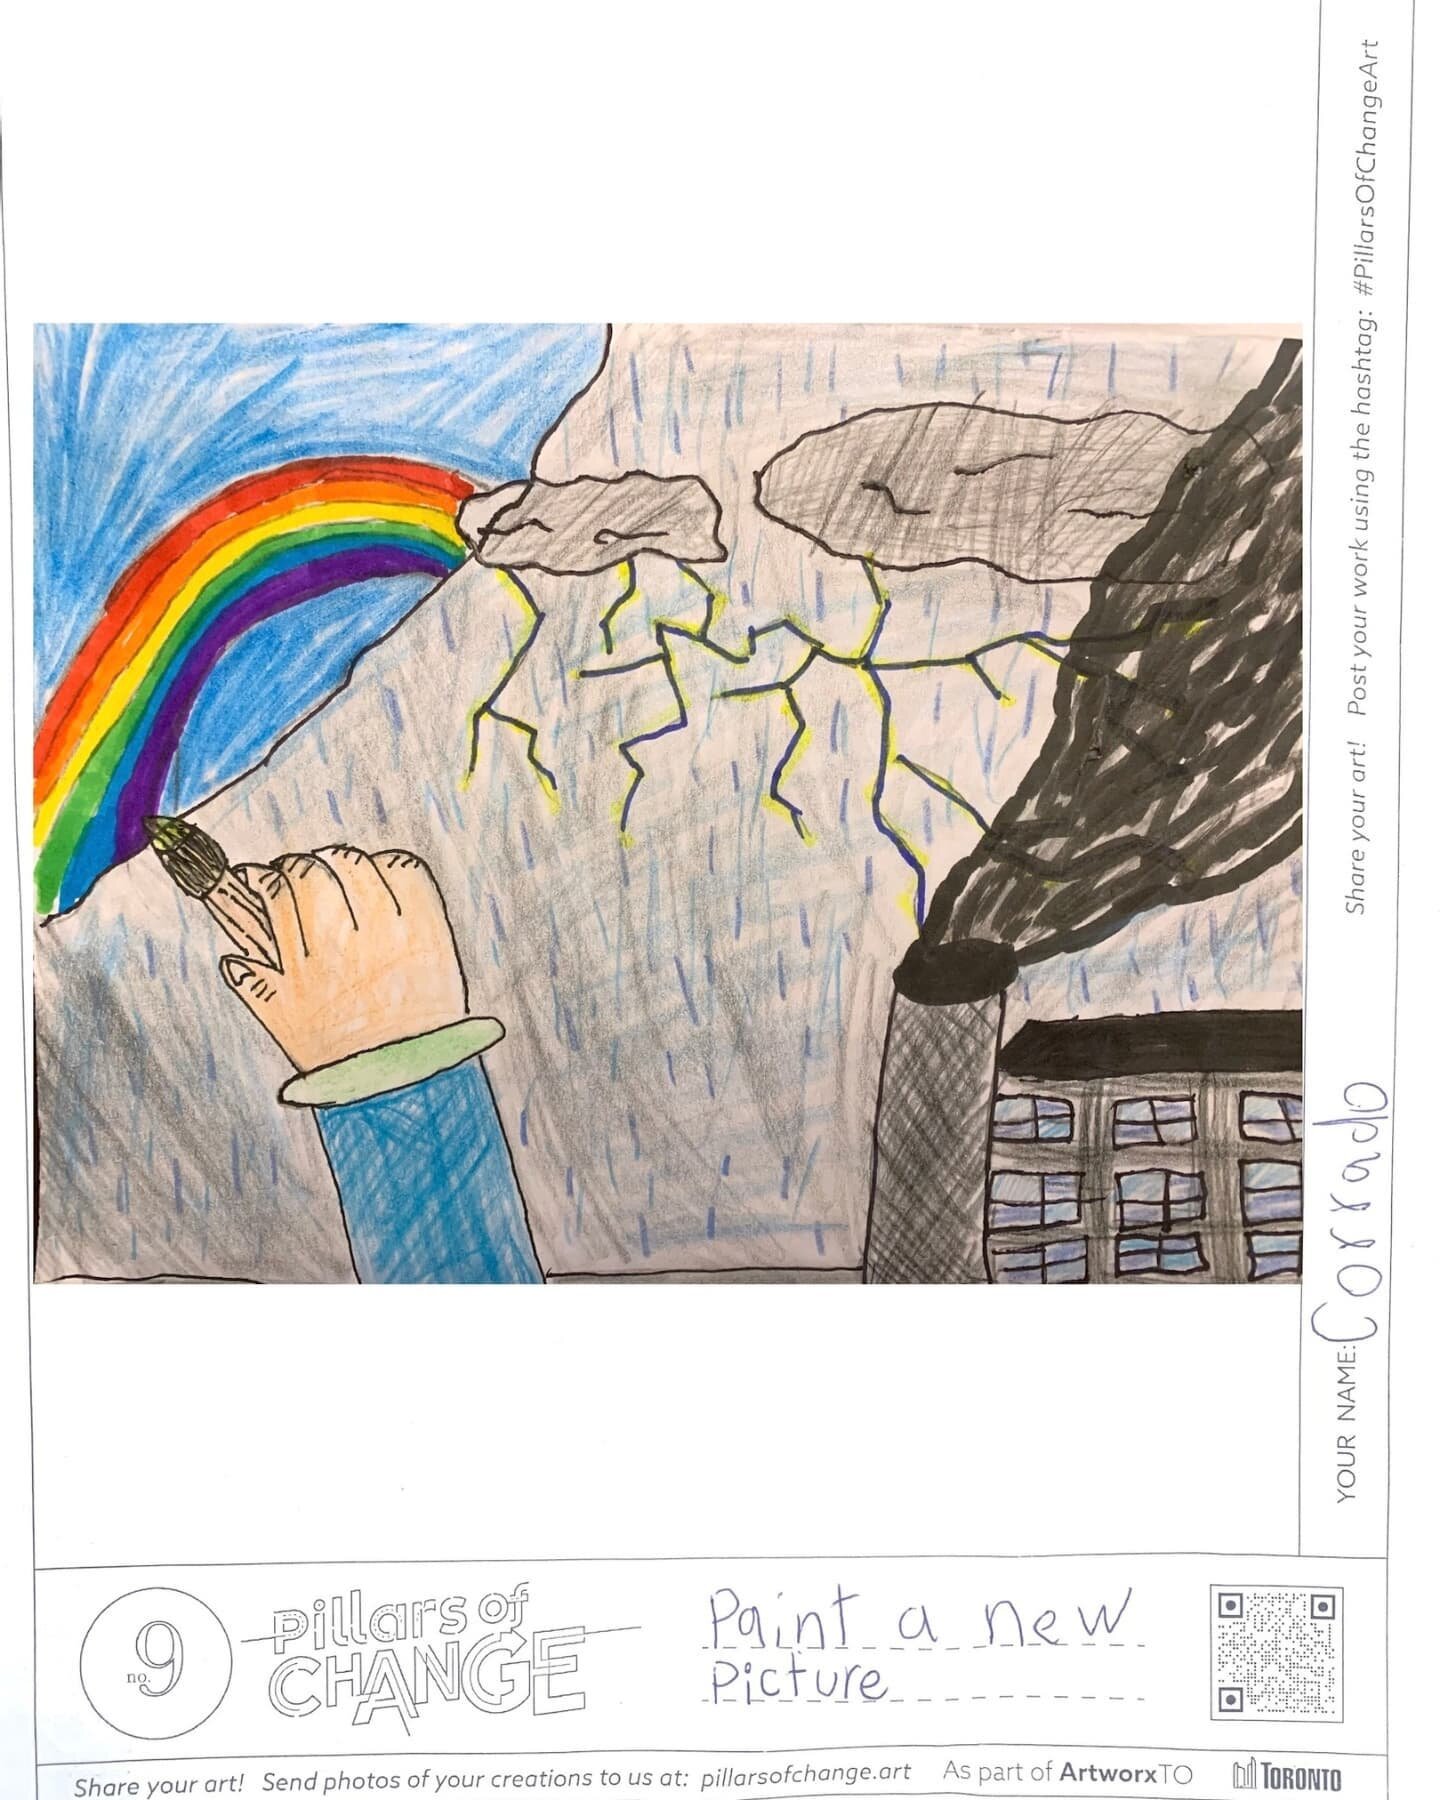 We&rsquo;re bringing you six more wonderful young artists from Garden Avenue Public School who have answered the question: ⁠
⁠
What social and environmental issues matter most to you?⁠
⁠
Swipe through for more inspiring art!⁠
⁠
1) Corrado &ldquo;Pain